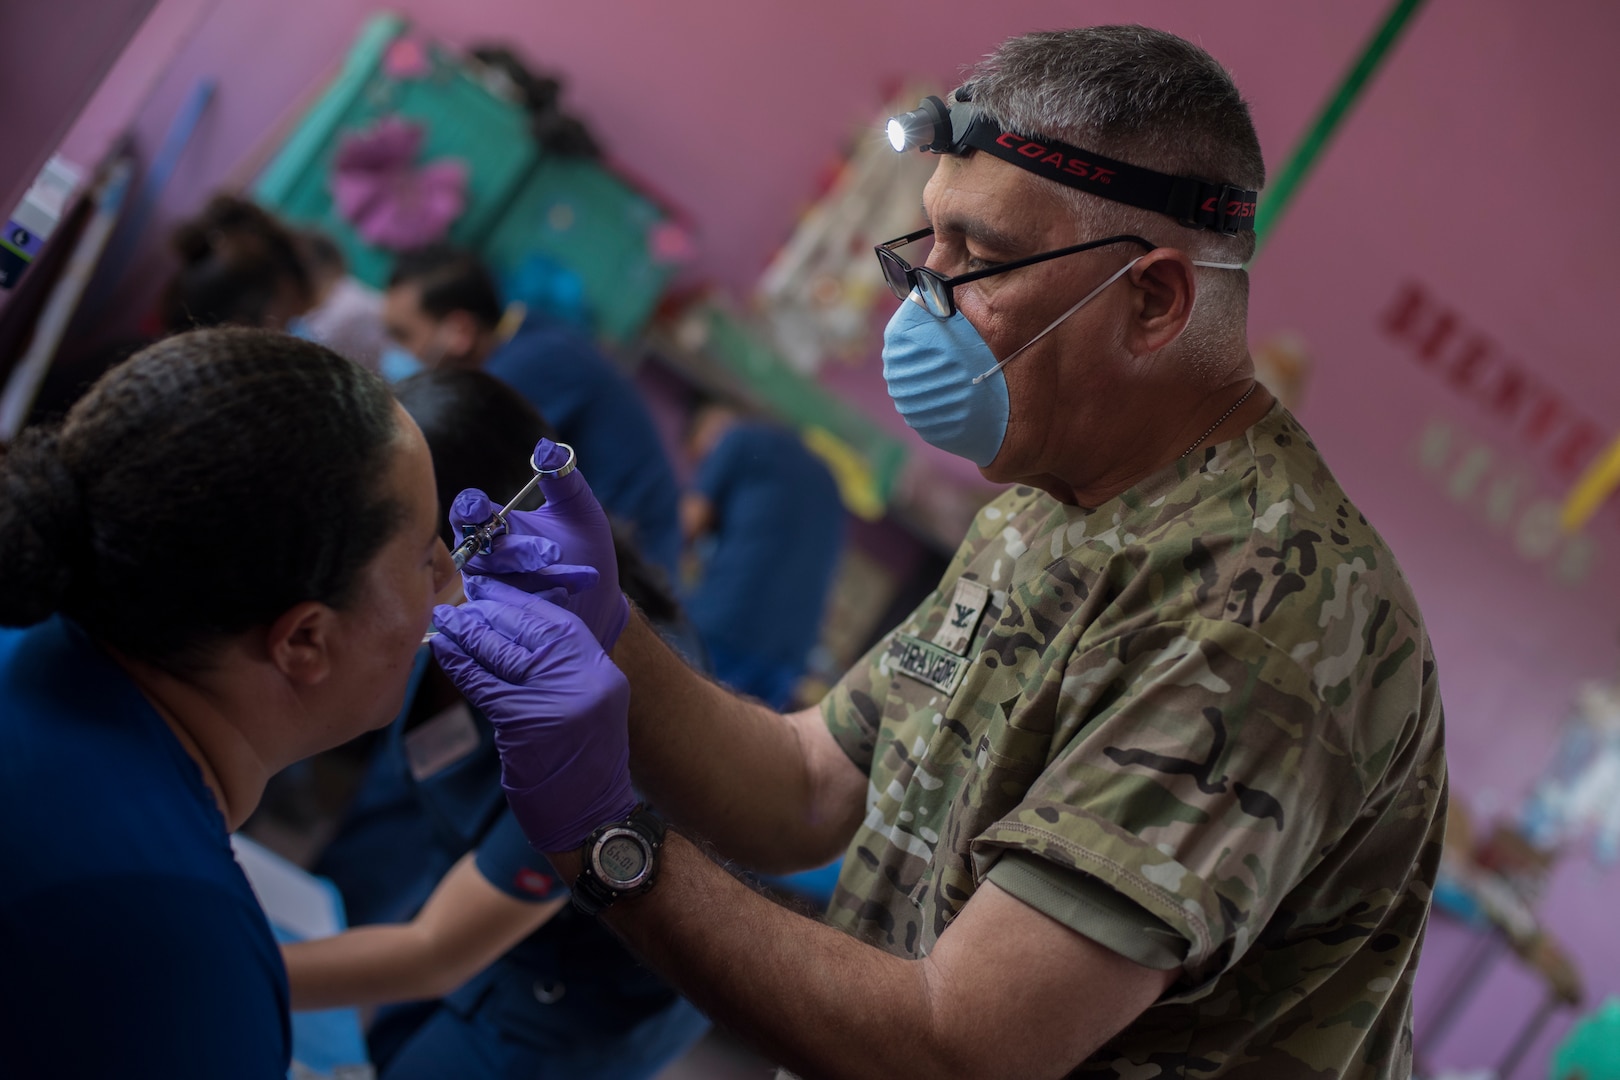 U.S. Army Col. Manuel Iravedra, Joint Task Force – Bravo Medical Element dentist, applies a numbing medication before a tooth extraction during a Medical Readiness Training Exercise (MEDRETE), May 9, 2019, in El Paraiso, Honduras. Members of JTF-B partnered with the Honduran Military and Ministry of Health to provide health care services for more than 1,300 Honduran citizens; reaching a third of the citizens in the towns of Argelia, Santa Maria and Las Dificultades in the El Paraiso Department. The goal of the mission was to provide the medical staff training in their areas of expertise as well as strengthen partnerships with the Honduran allies. (U.S. Air Force photo by Staff Sgt. Eric Summers Jr.)